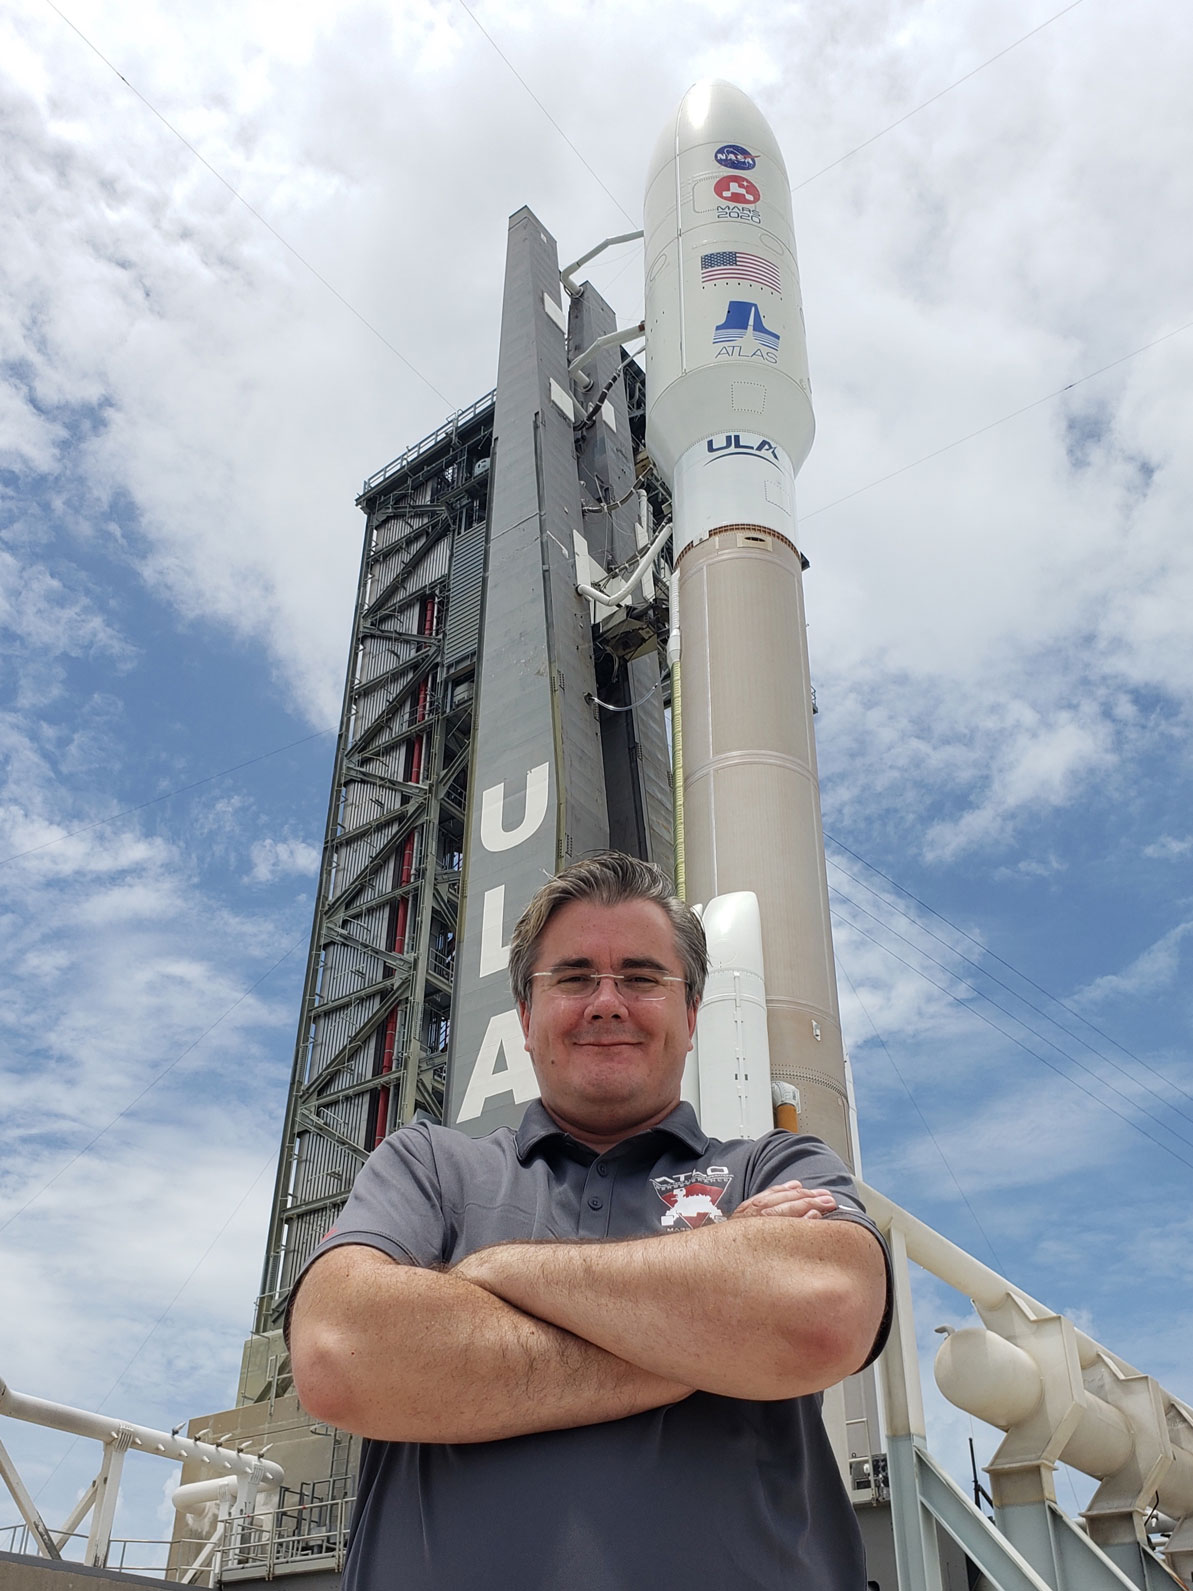 Dave Gruel at Cape Canaveral, day before the Perseverance Launch